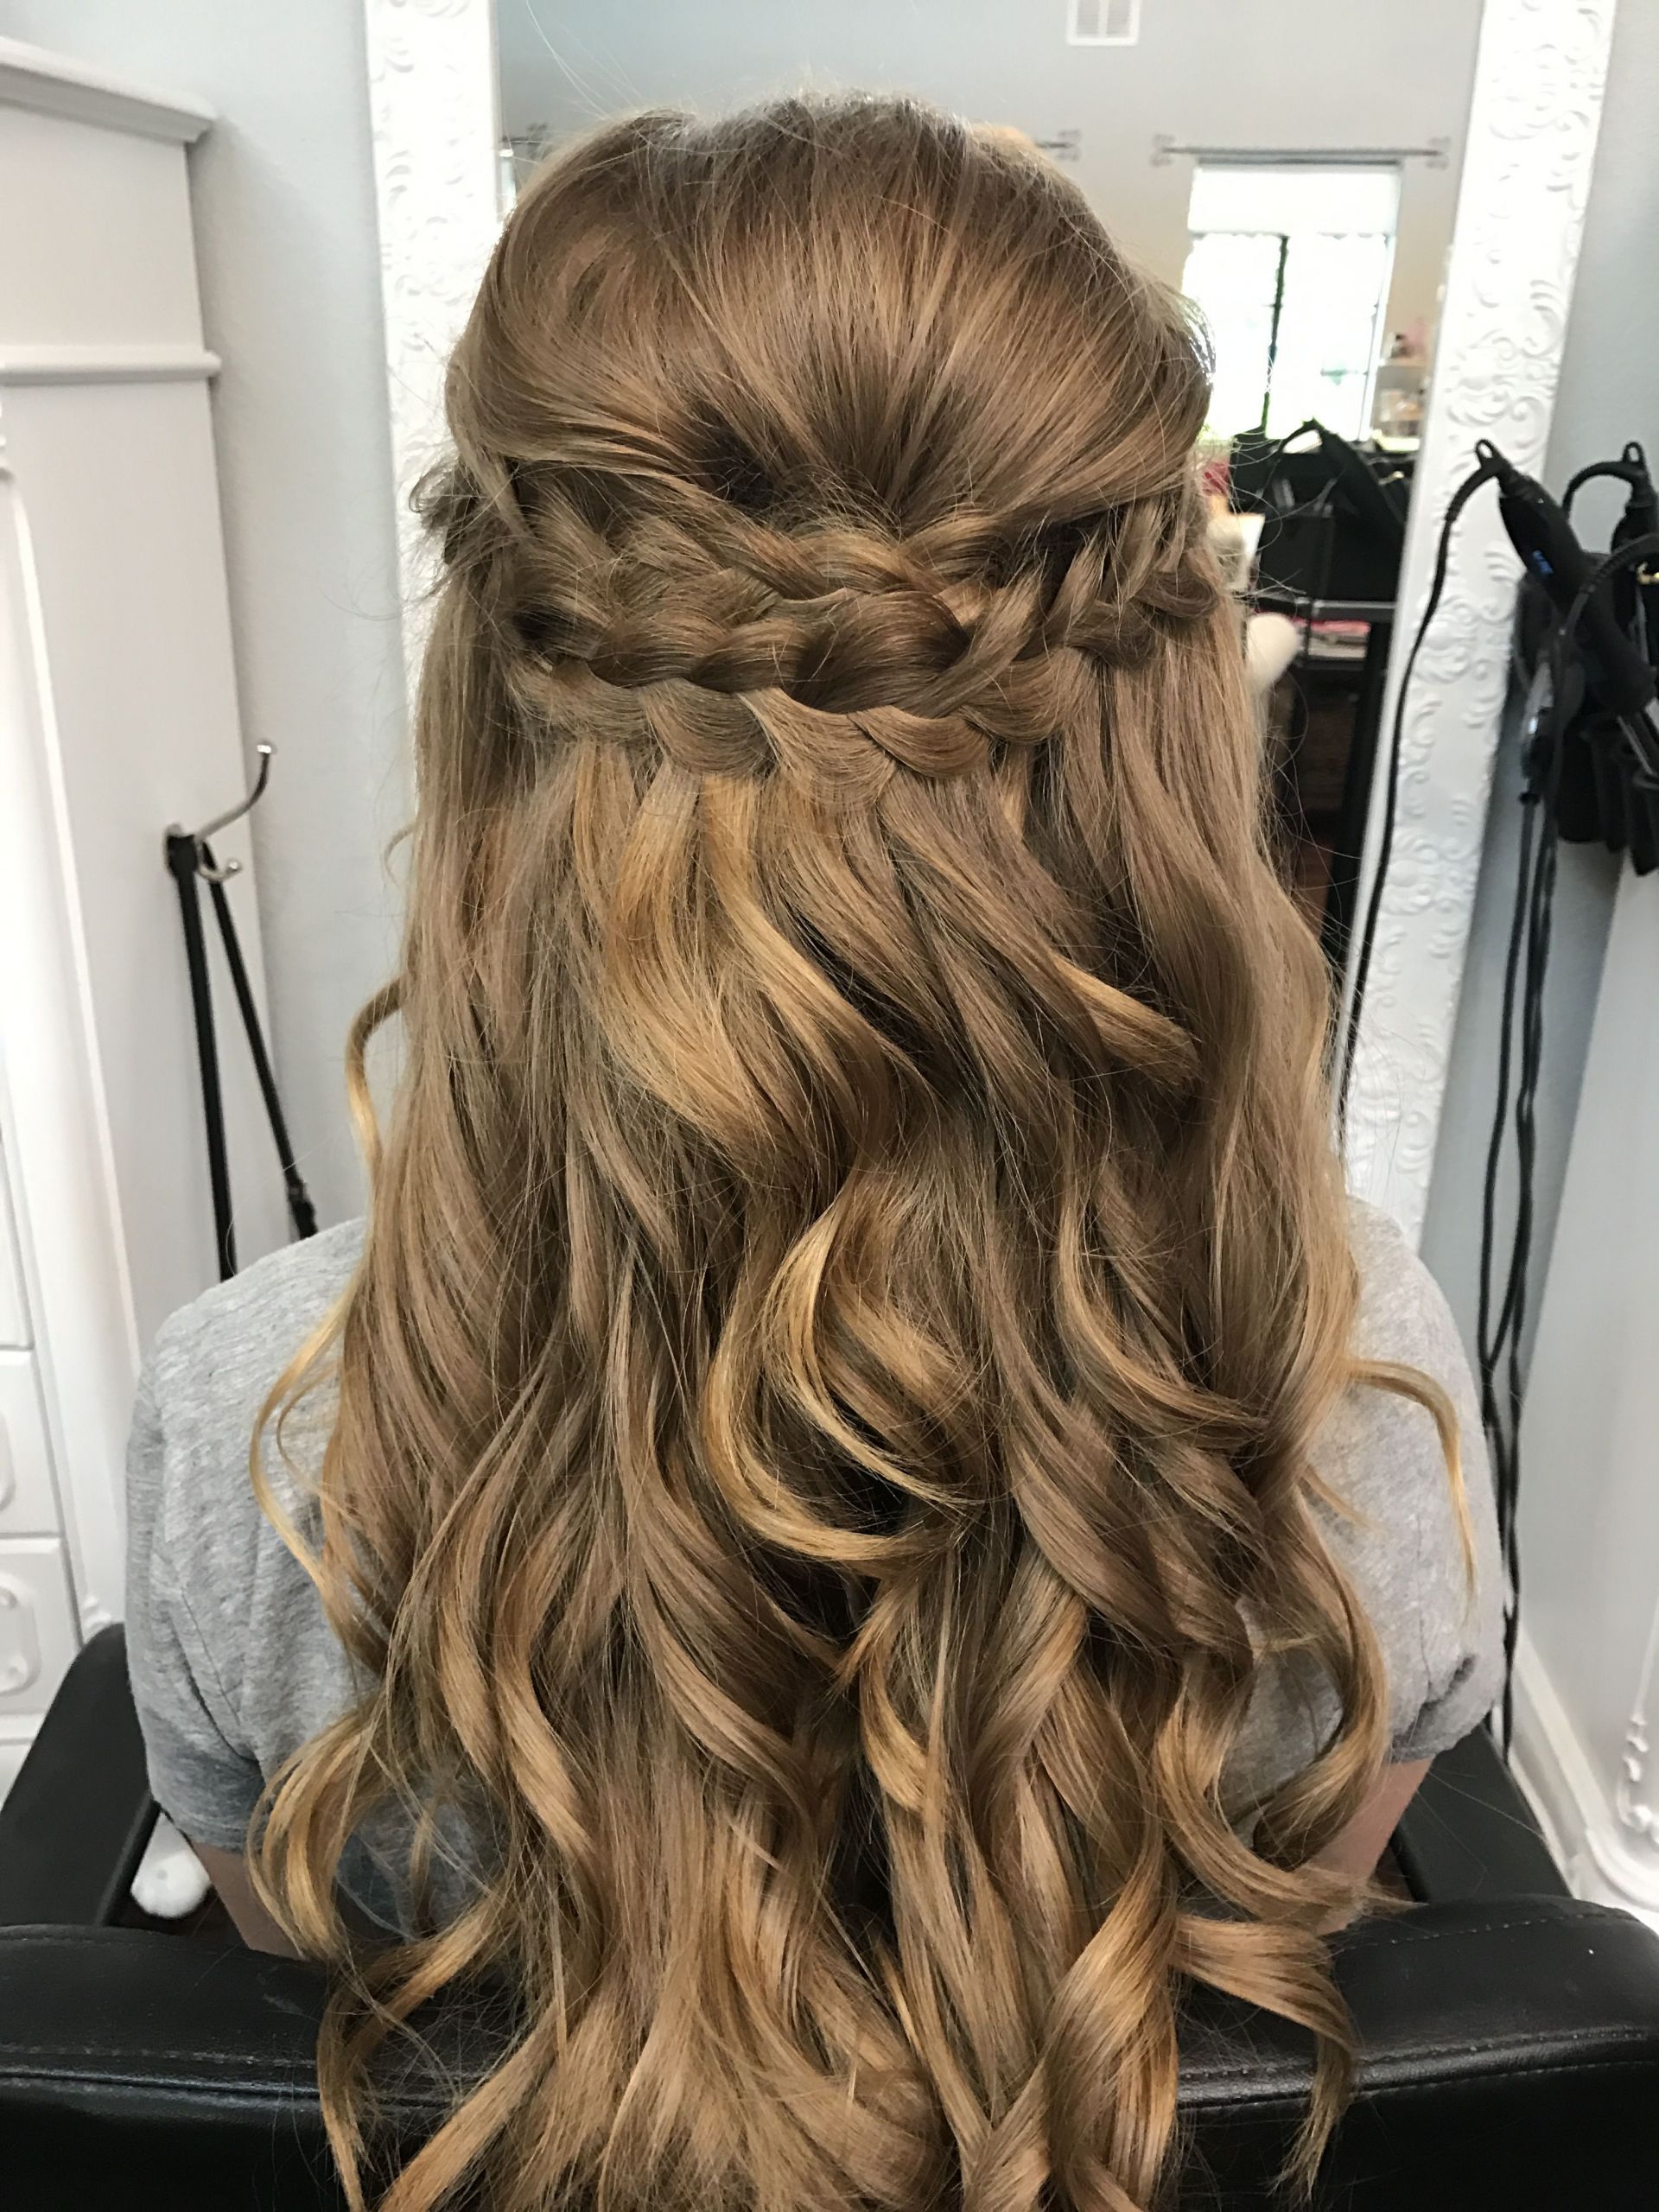 Prom Hairstyles Down With Braid
 Braided half up half down prom hair